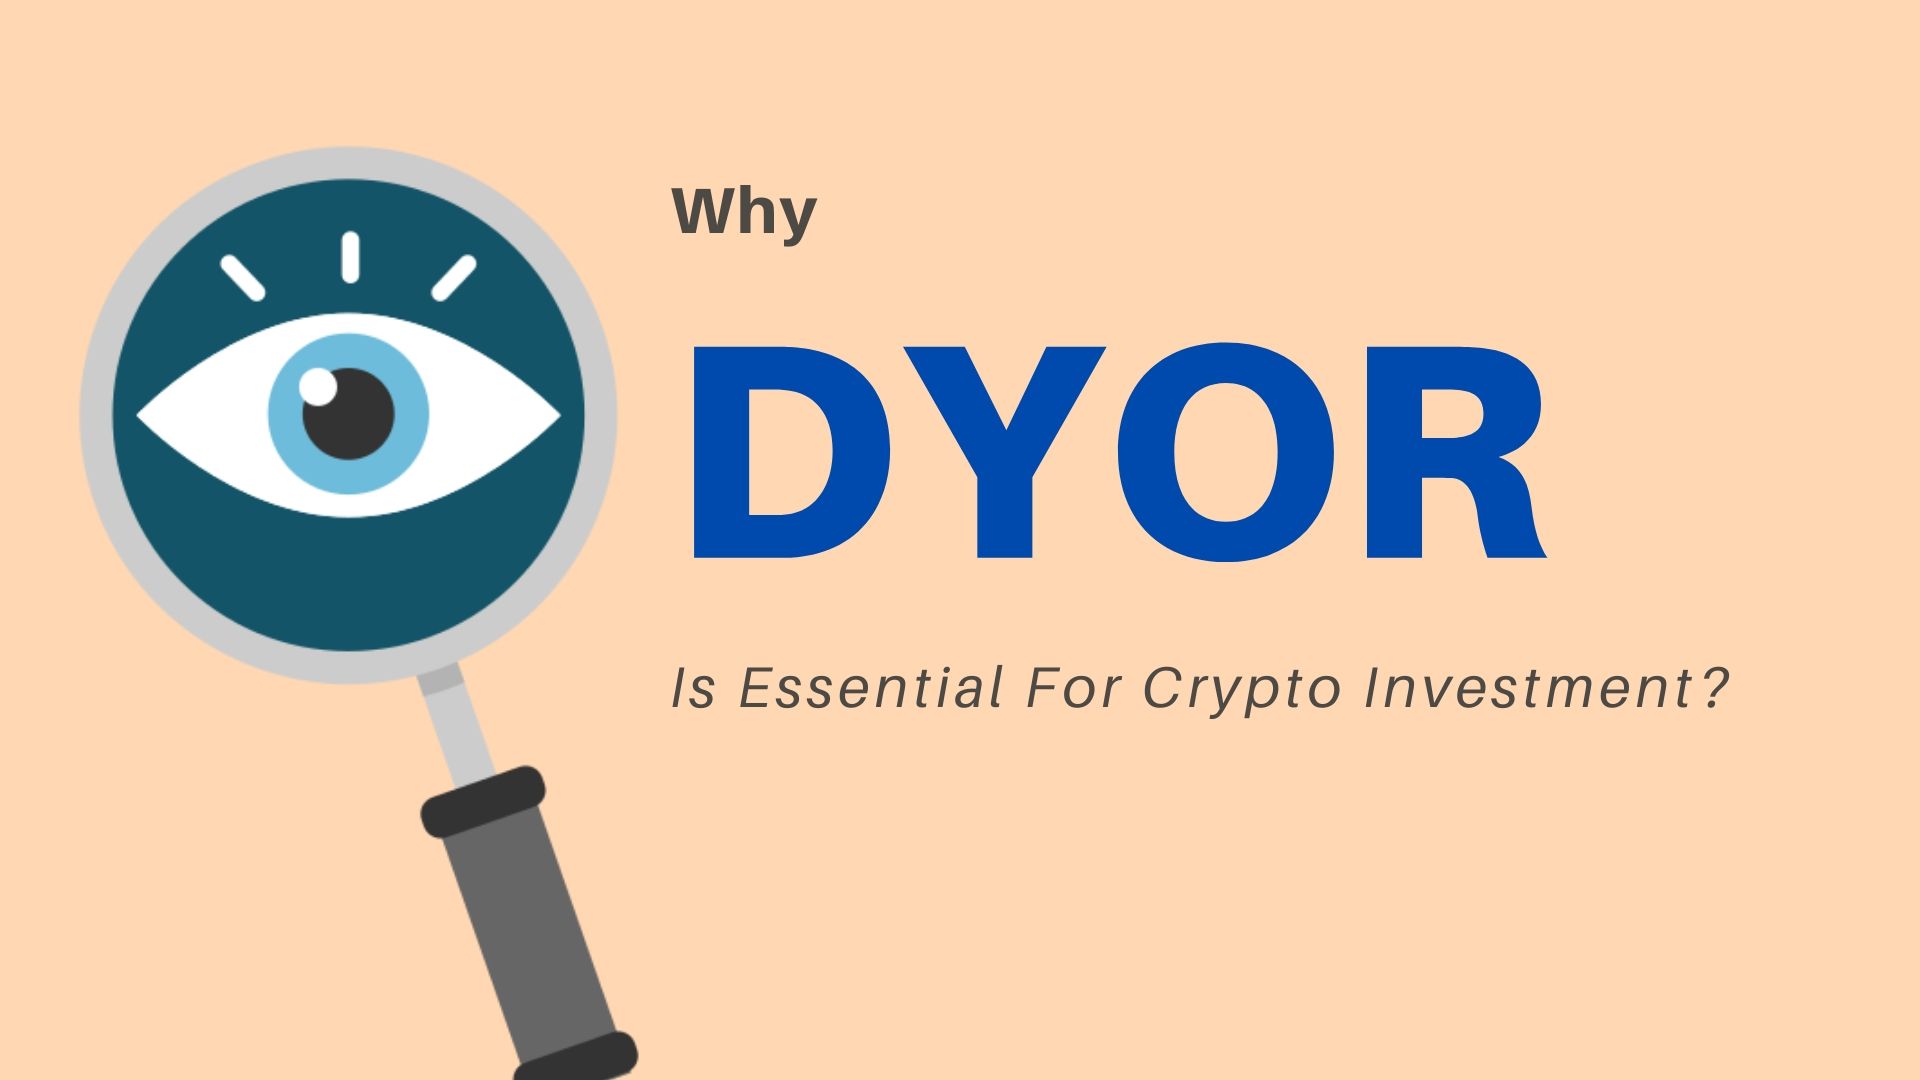 Why DYOR Is Essential For Crypto Investment?